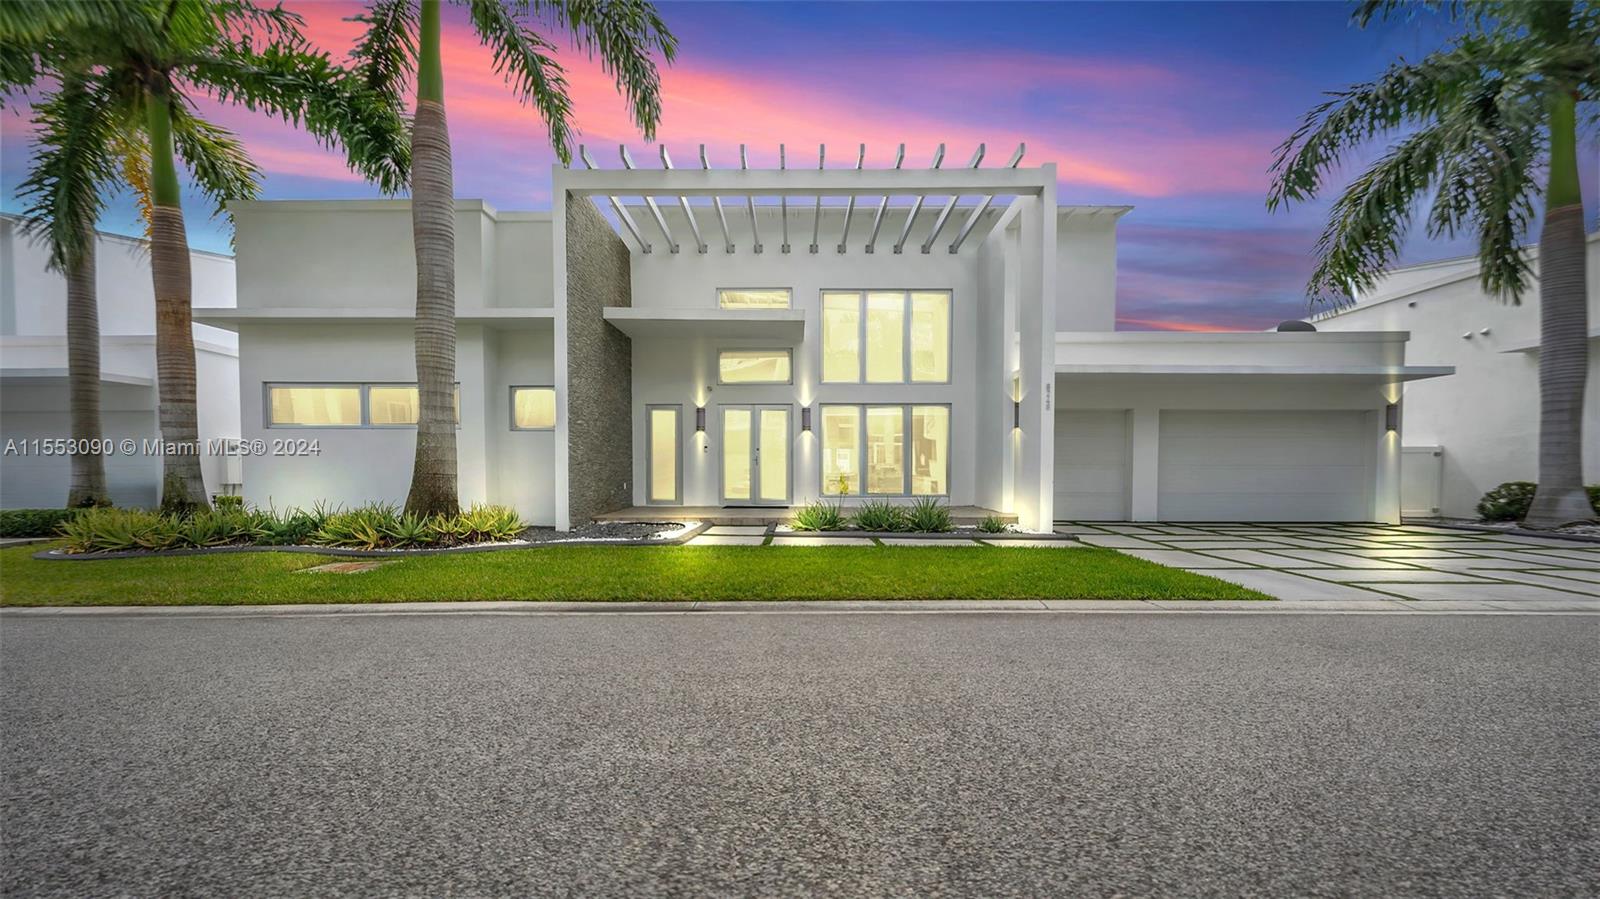 Experience Unparalleled Luxury in Miami's most Exclusive OASIS in Doral!  Extraordinary 5 Bedroom, 6 Bathroom, One-Story Estate for Sale!  Features: * Sumptuous bedrooms with lavish In-suite bathrooms & generous closet space * 6 opulent full bathrooms, perfect for entertaining guests * Private office, ideal for working from home or studying * Prime location in the heart of Doral, offering: + Unrivaled access to Miami International Airport + Proximity to world-class schools + Exclusive shopping & dining experiences at City Place +  * Single-story layout, providing: + Effortless living & navigation + No stairs to climb!  Indulge in the epitome of luxury living, just walking steps from City Place!